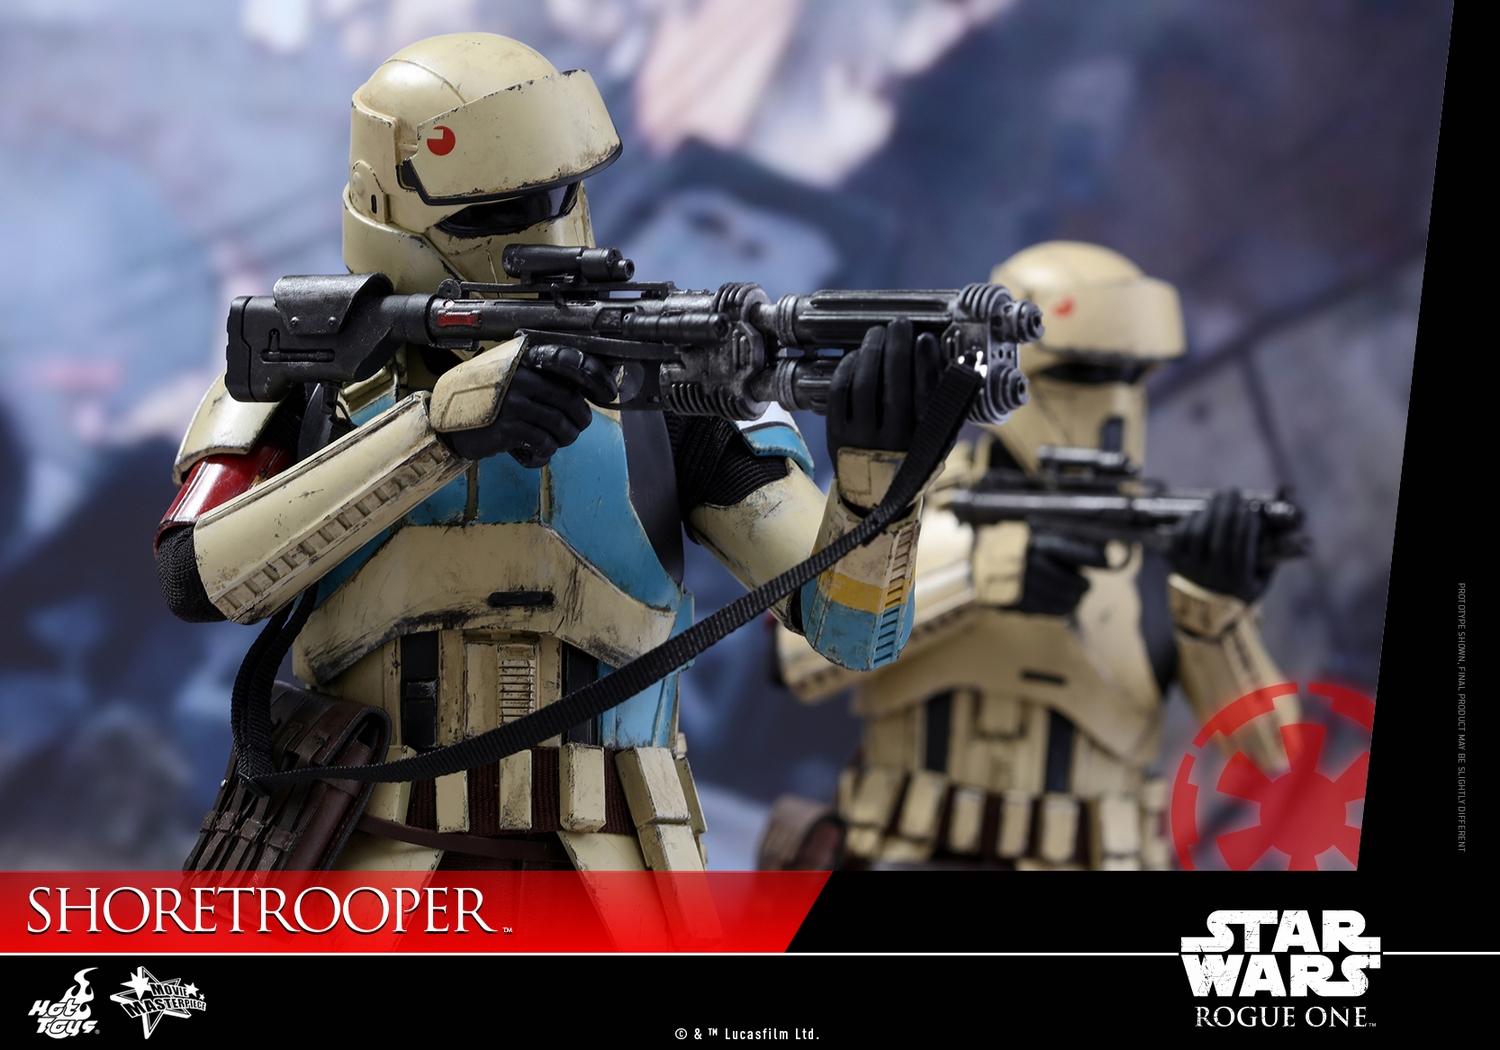 hot-toys-star-wars-rogue-one-shoretrooper-collectible-figure-092916-007.jpg